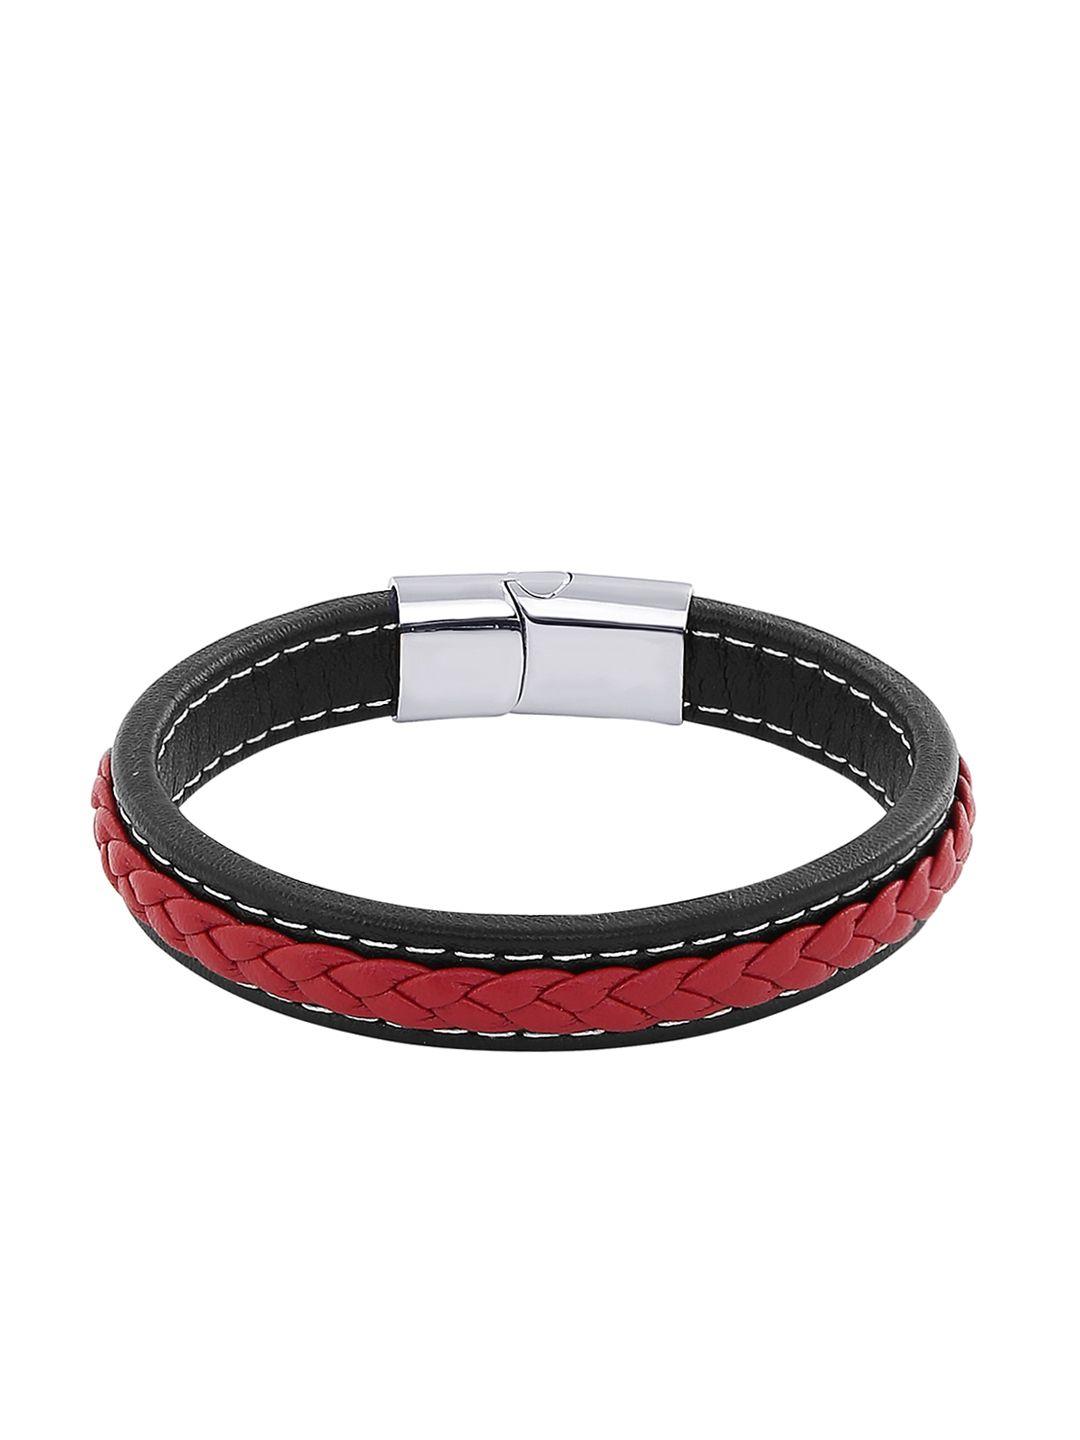 moon dust red leather bangle-style bracelet